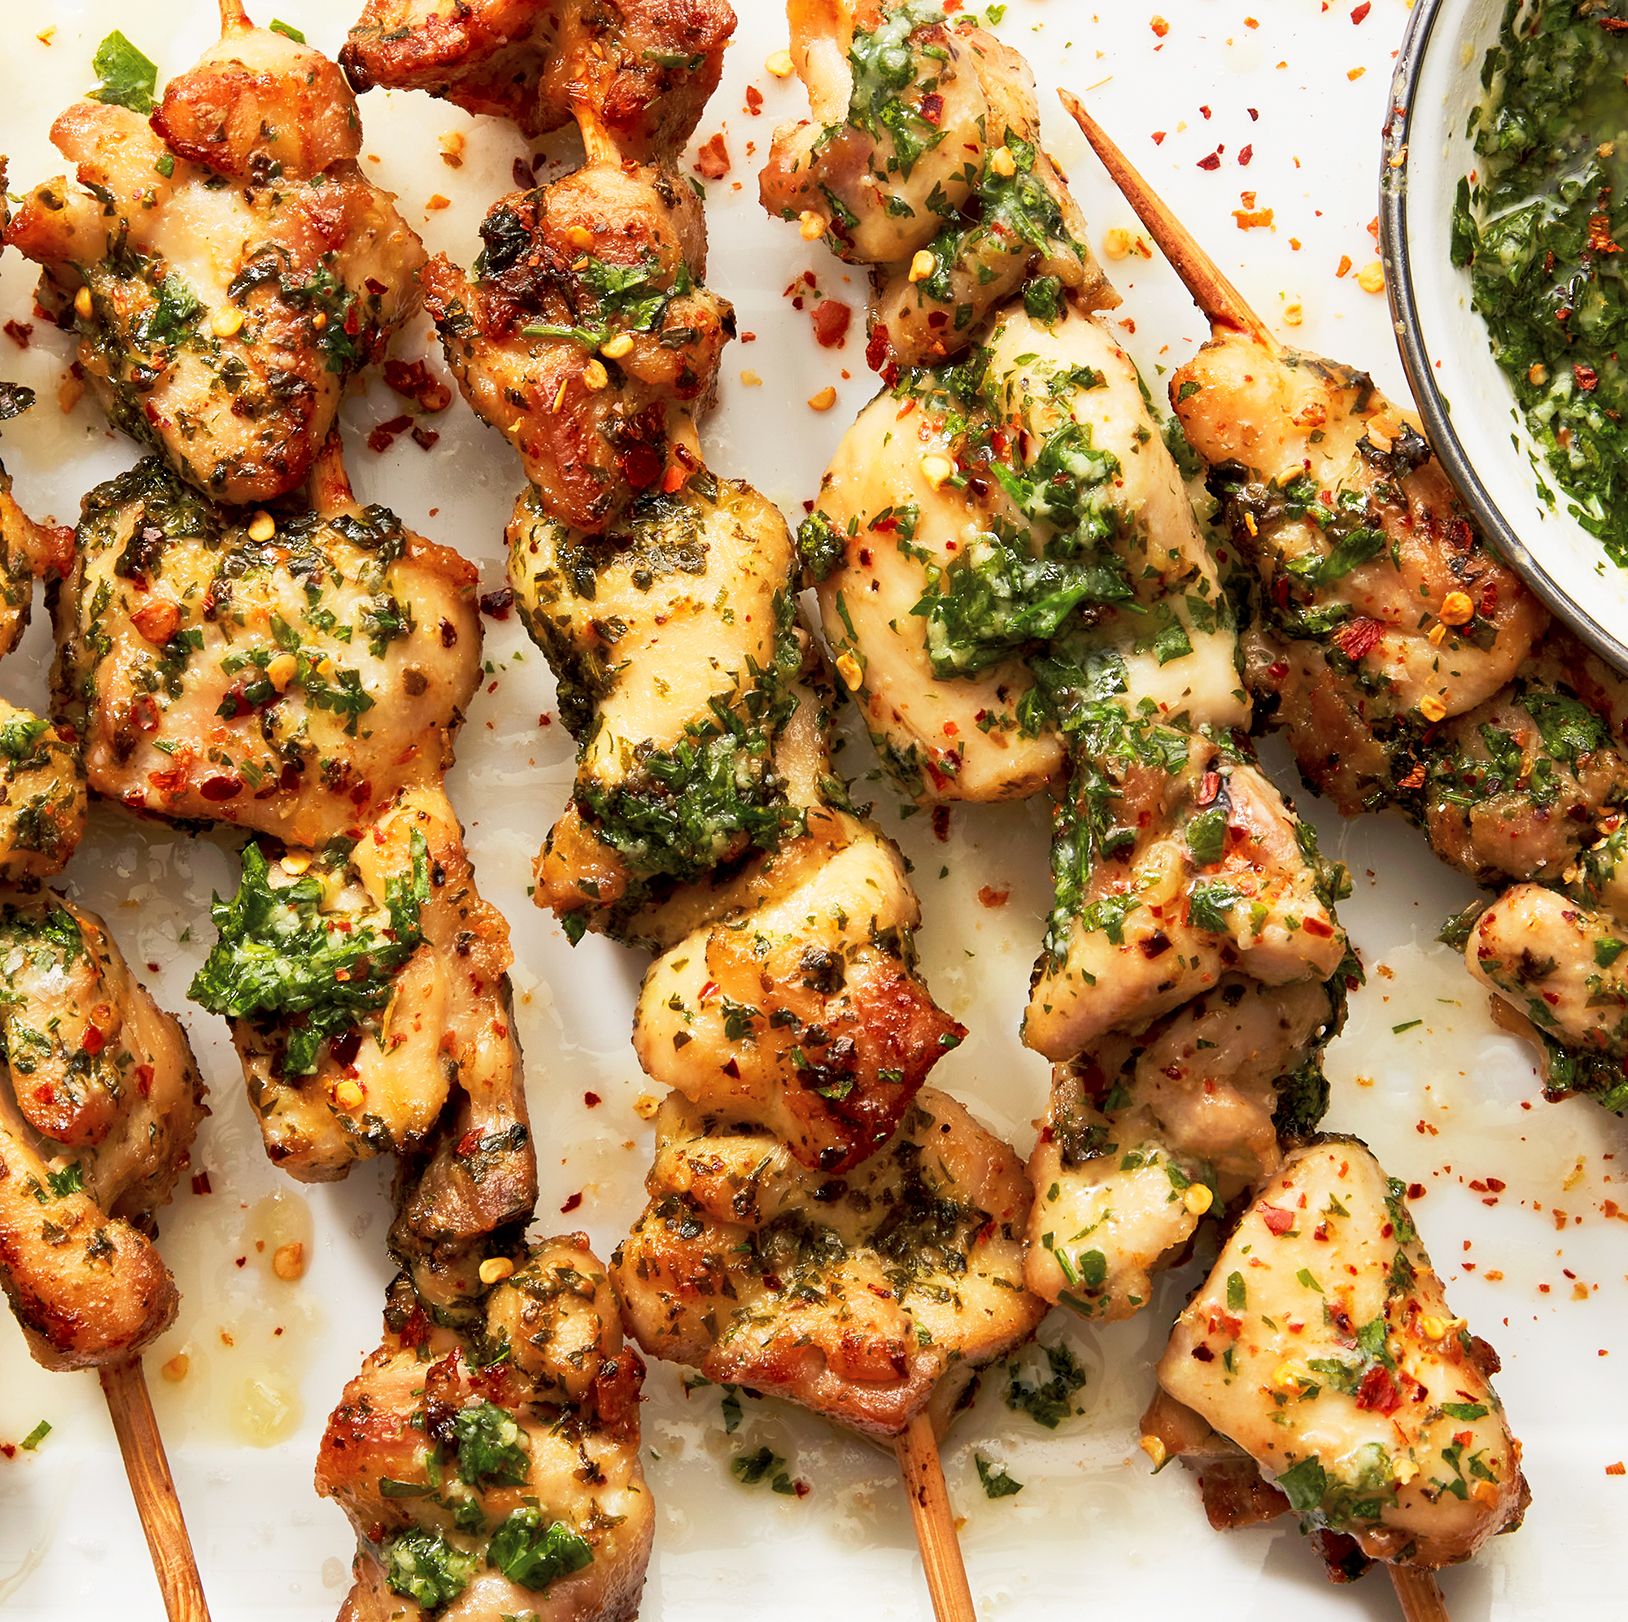 Garlic-Parmesan Chicken Skewers Are Your New Summer Go-To